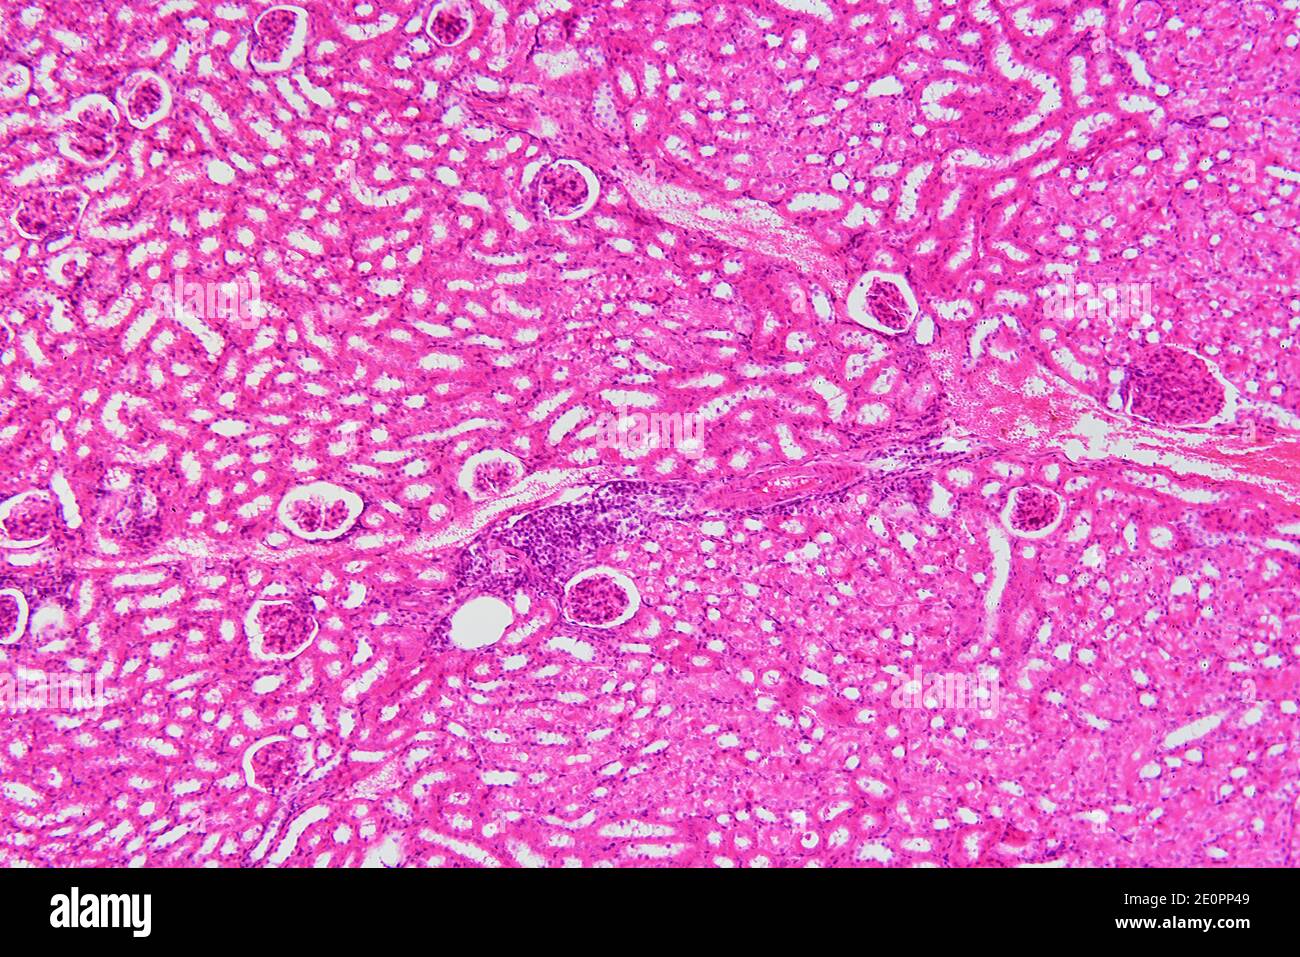 Human kidney section with injected blood showing glomeruli, Malpighian corpuscles and parenchyma. X75 at 10 cm wide. Stock Photo